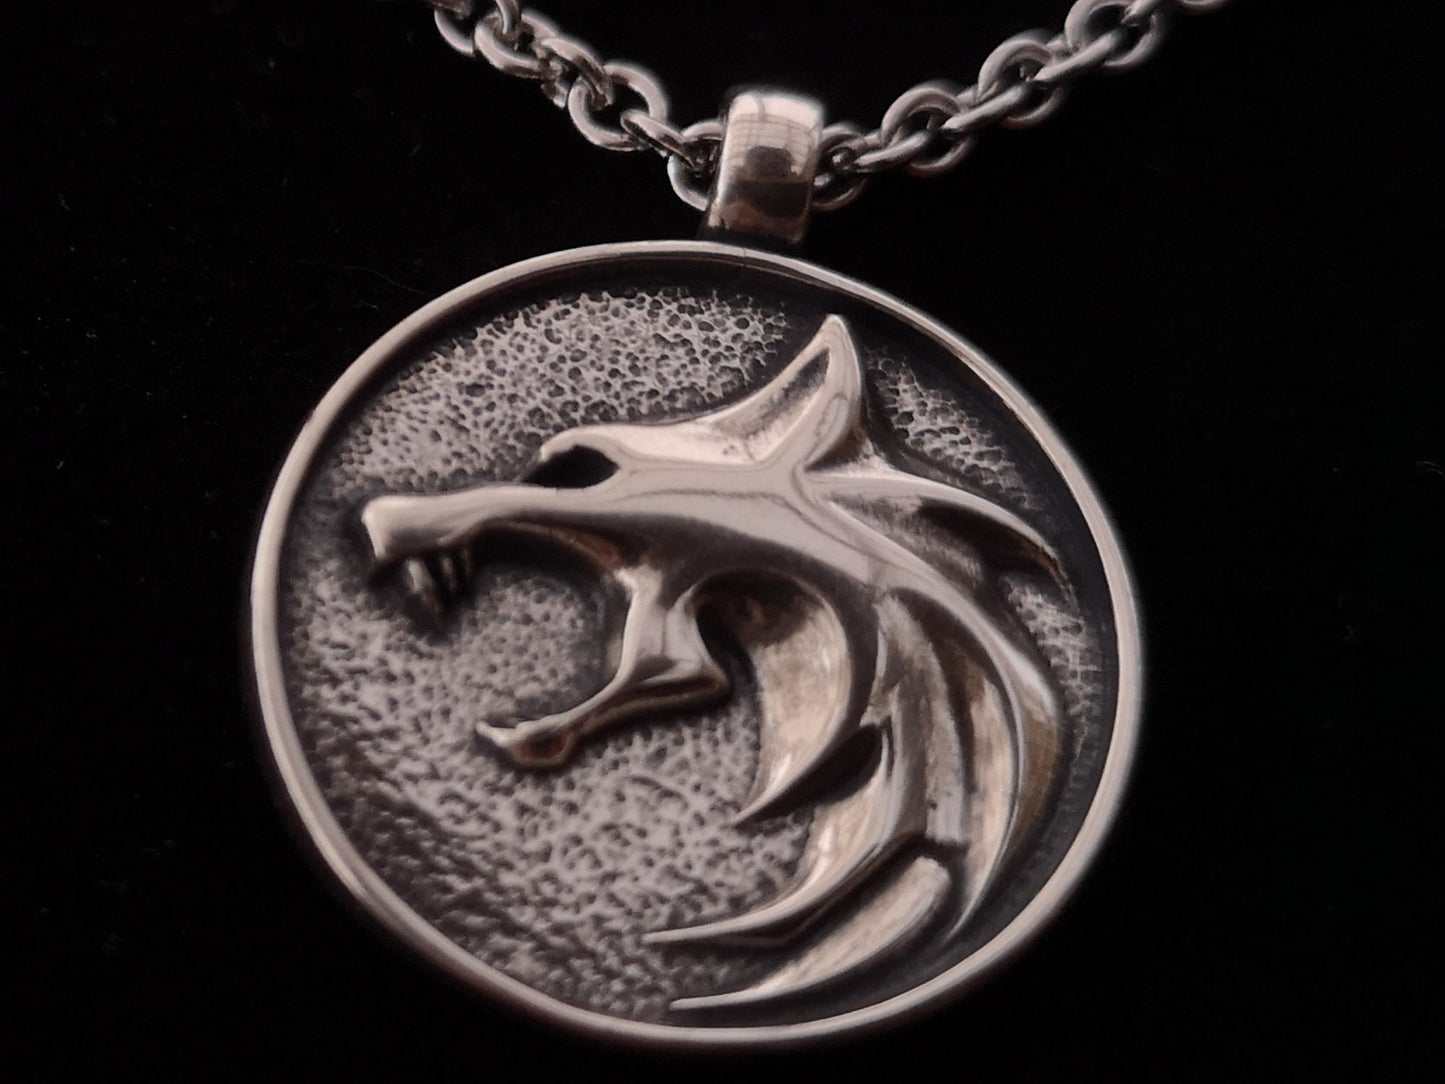 925 Sterling Silver Witcher Necklace Pendant With Chain - Baldur Jewelry